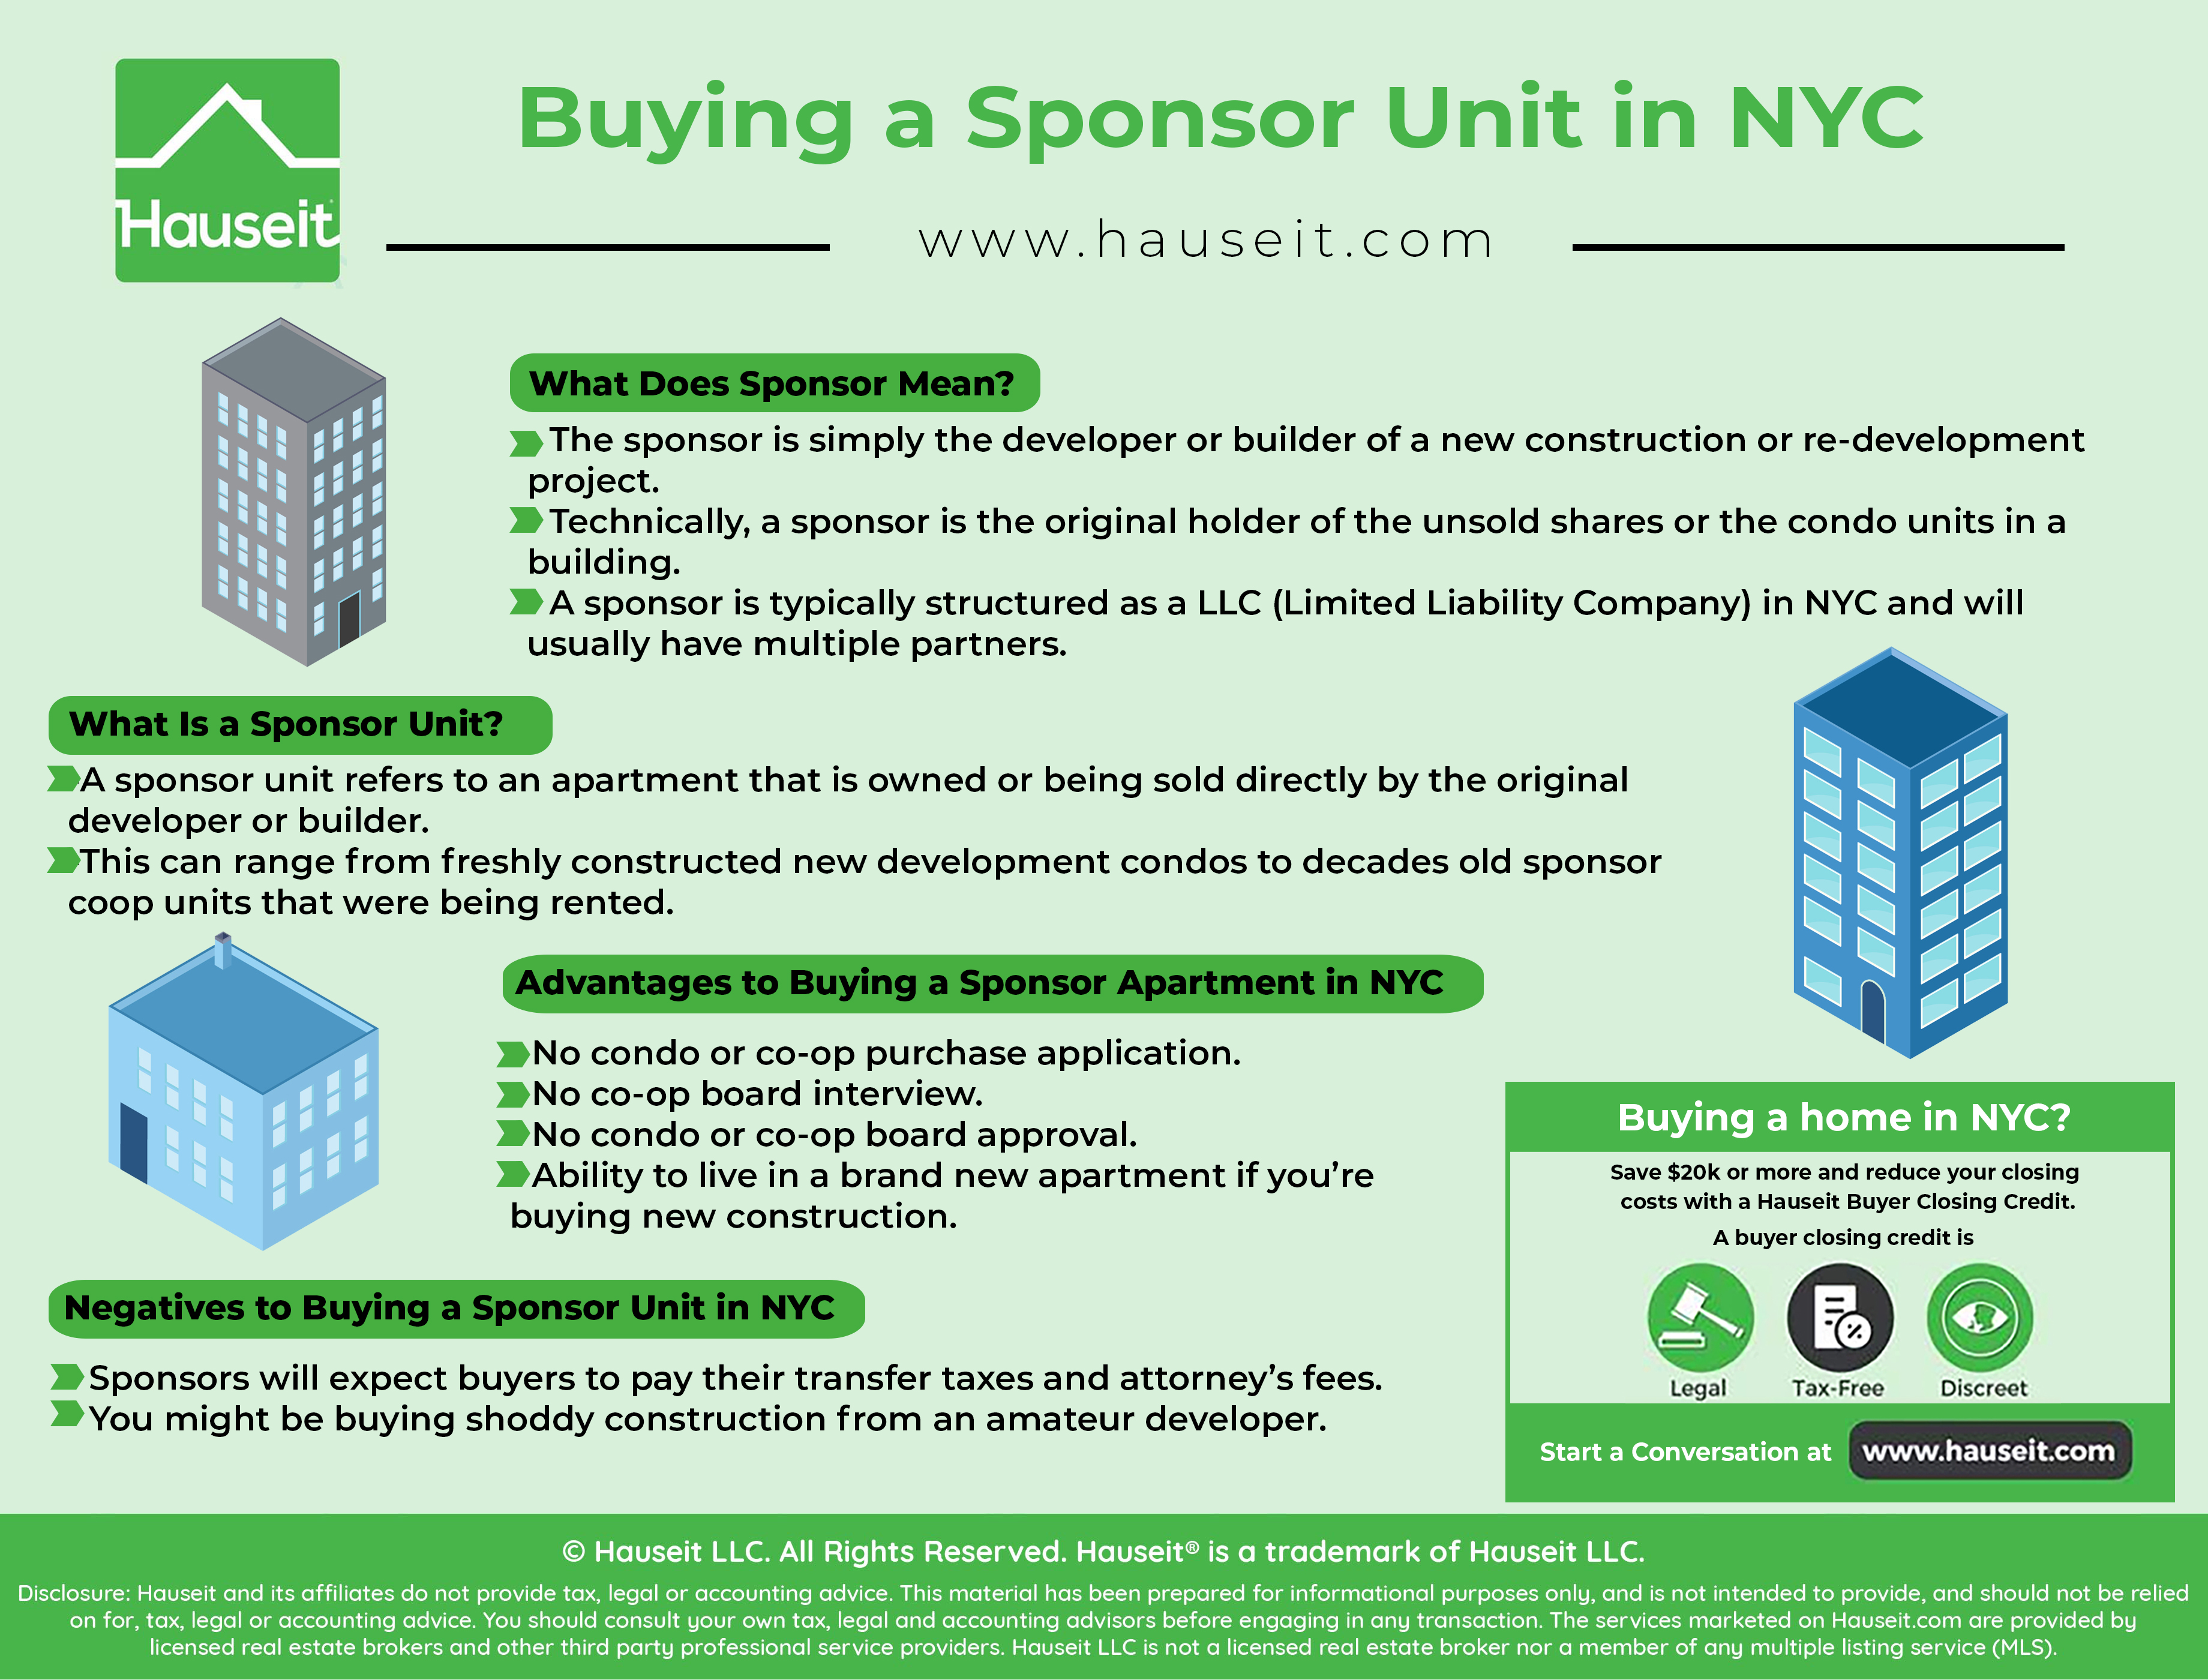 A sponsor unit refers to an apartment that is owned or being sold directly by the original developer or builder.